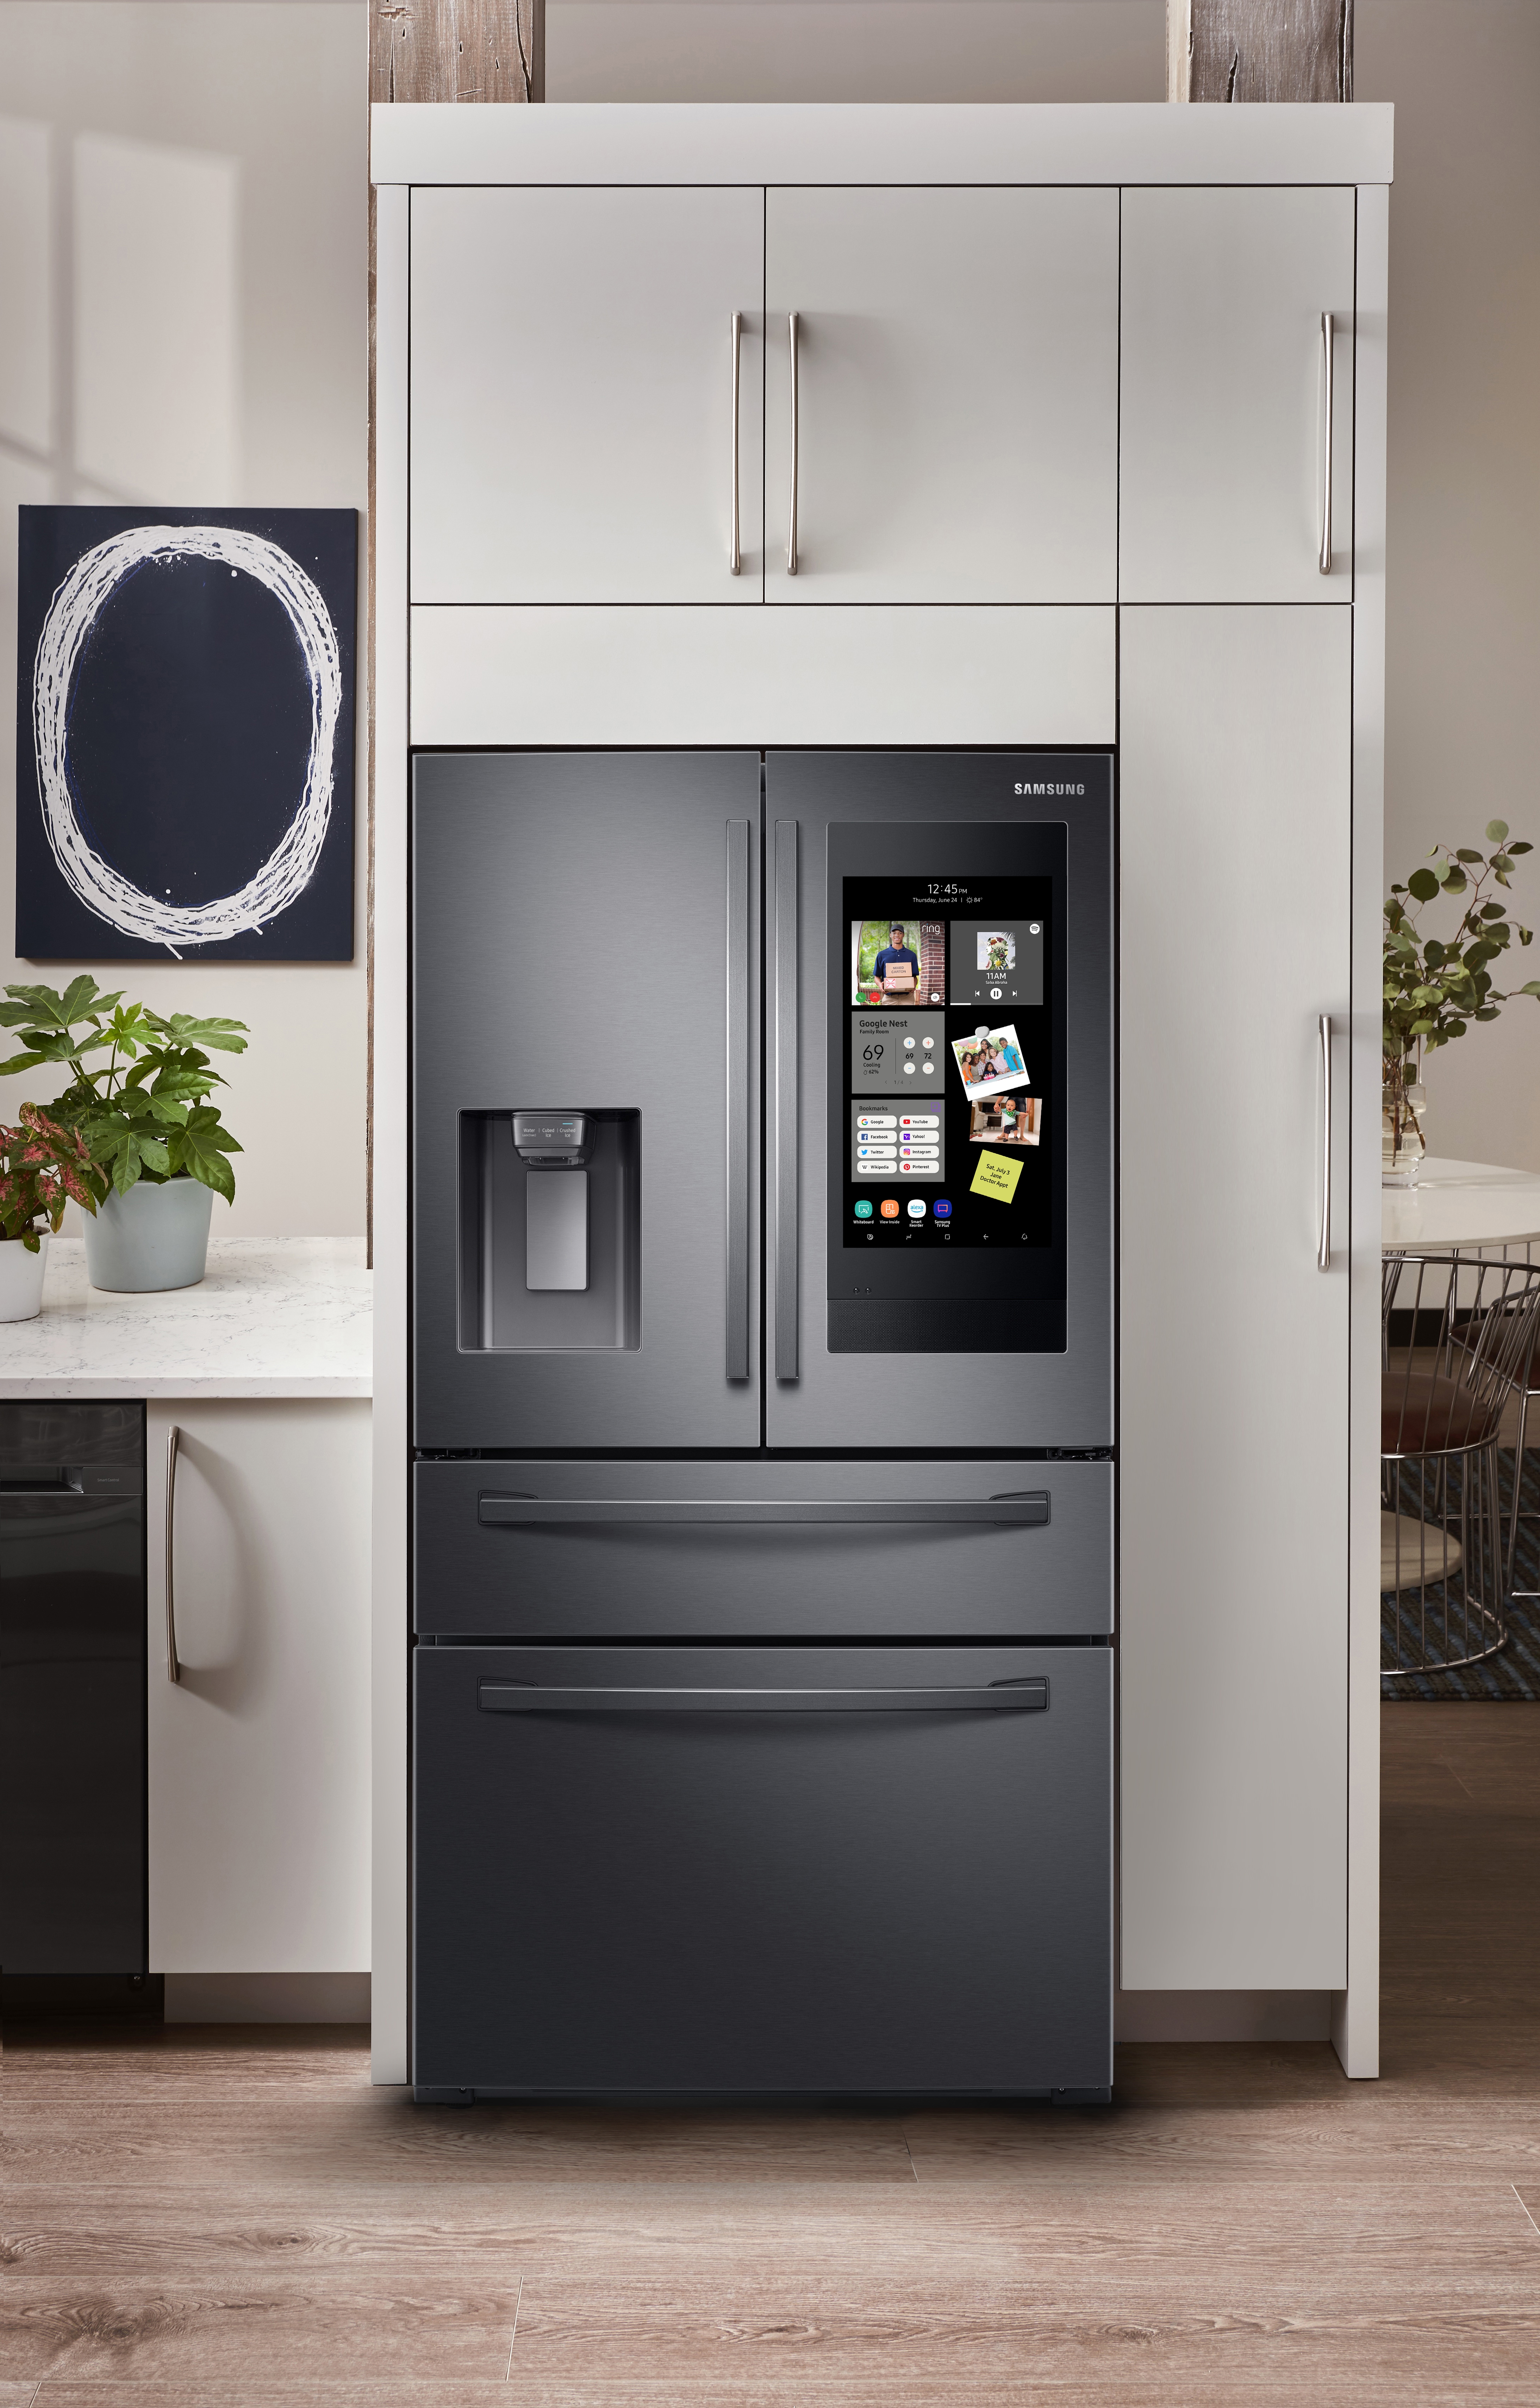 Thumbnail image of 22 cu. ft. 4-Door French Door, Counter Depth Refrigerator with 21.5” Touch Screen Family Hub™ in Black Stainless Steel